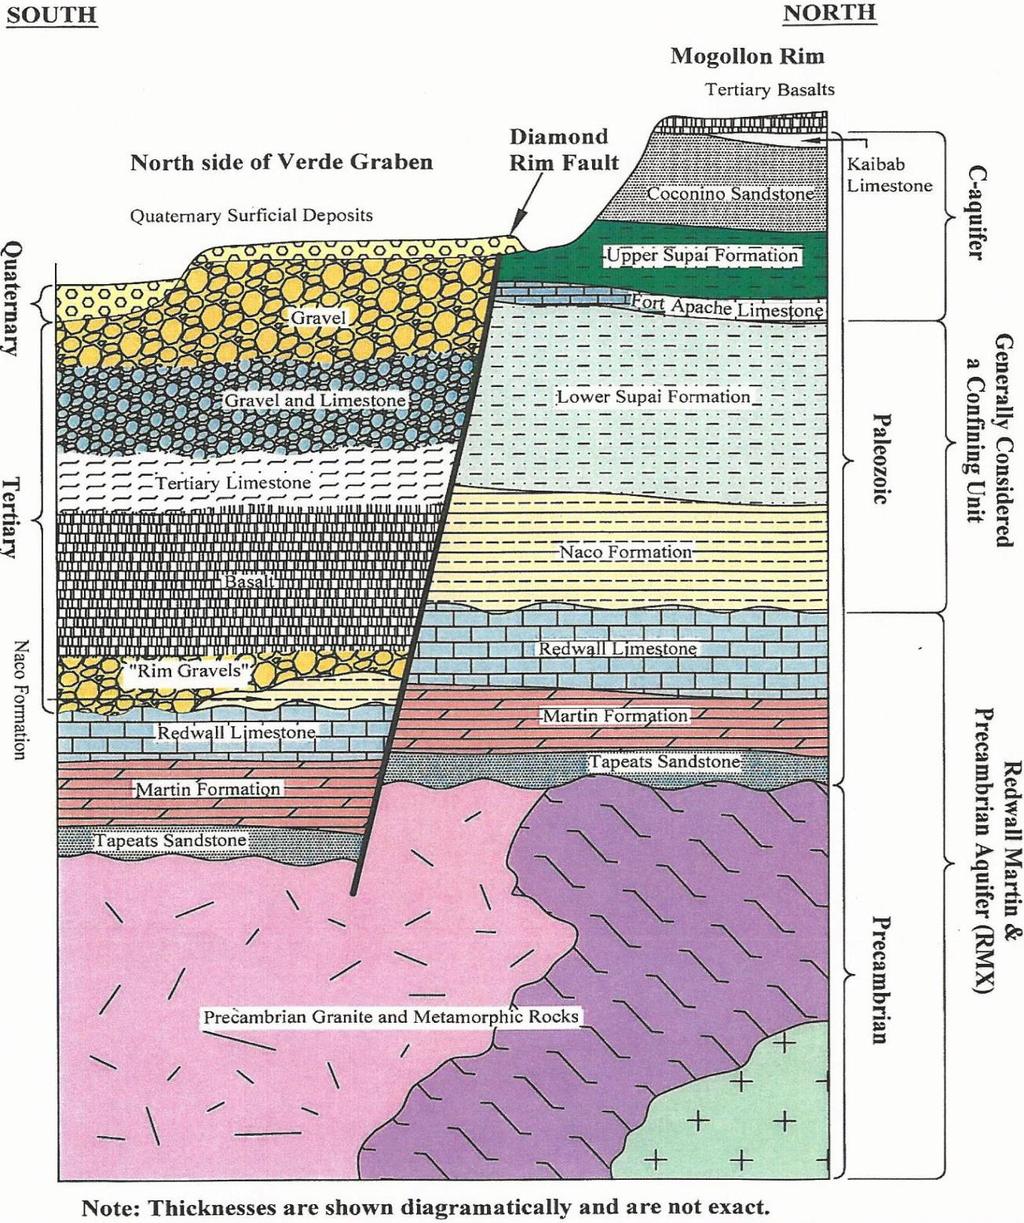 Composite, General Stratigraphic Section for the Study Area.